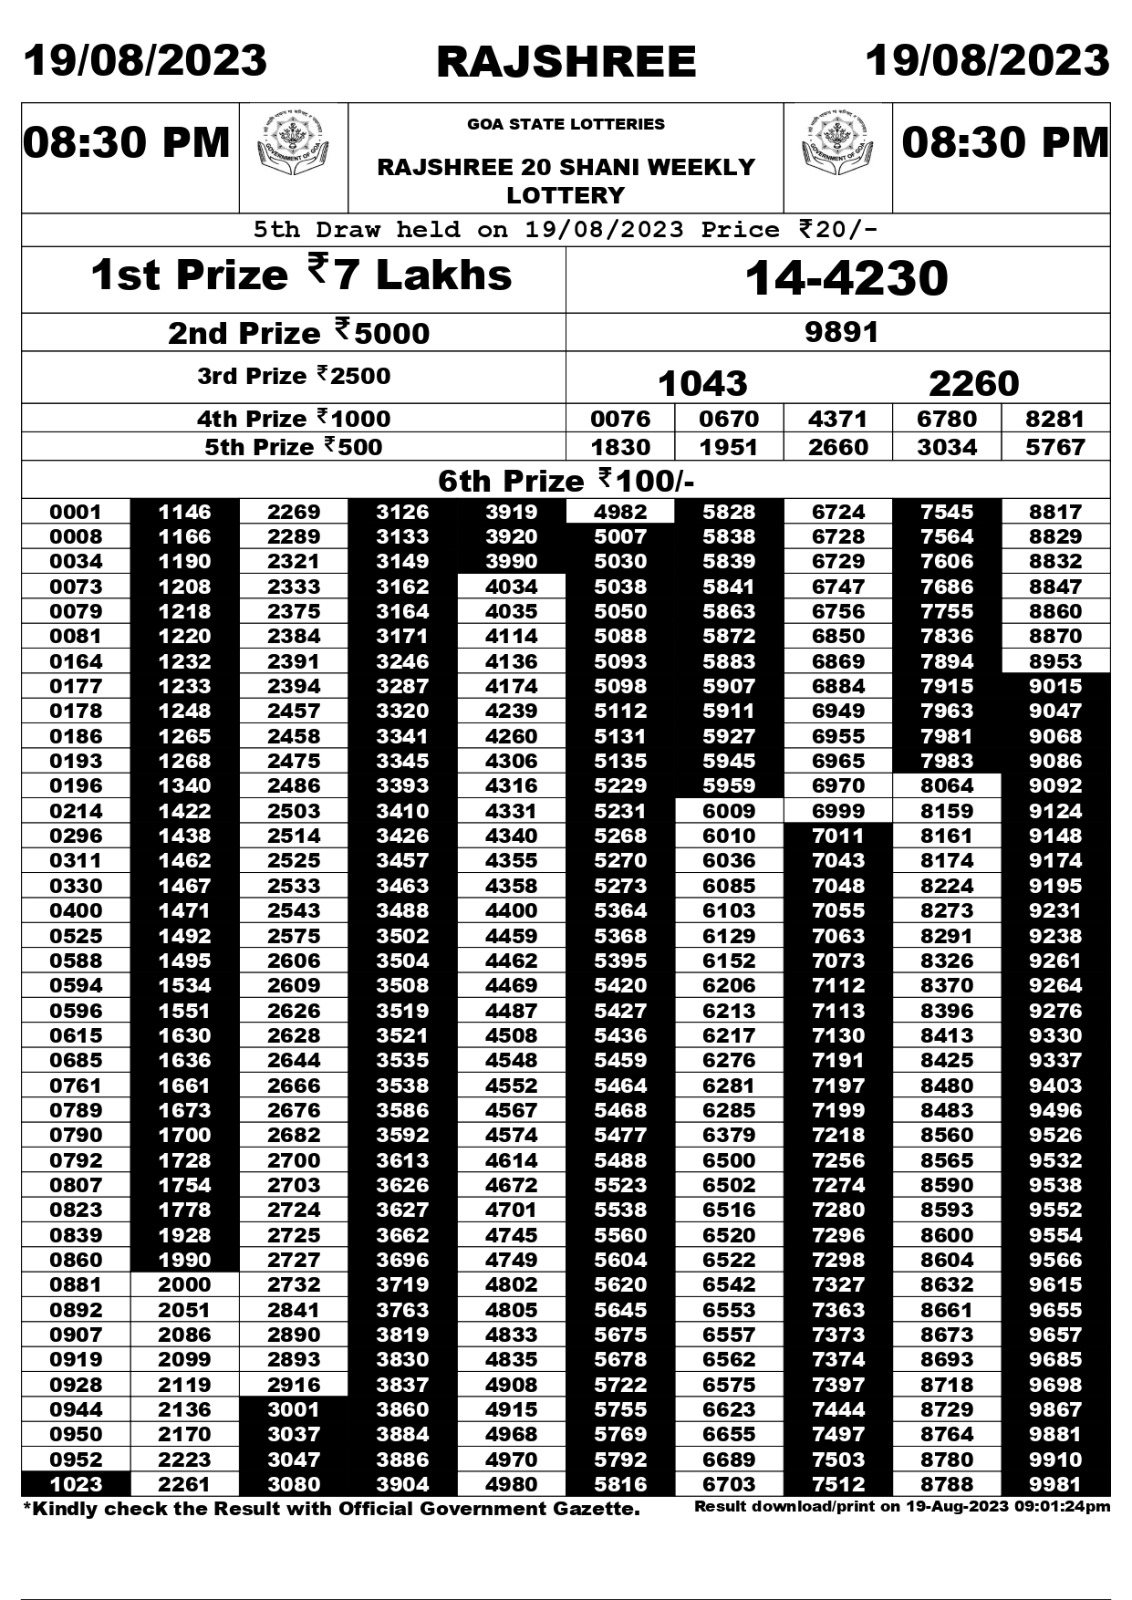 Kerala Lottery Result Today: Akshaya AK 457 weekly lottery result declared  on keralalotteries.net! Lucky first prize winner gets Rs 70 lakh | Zee  Business